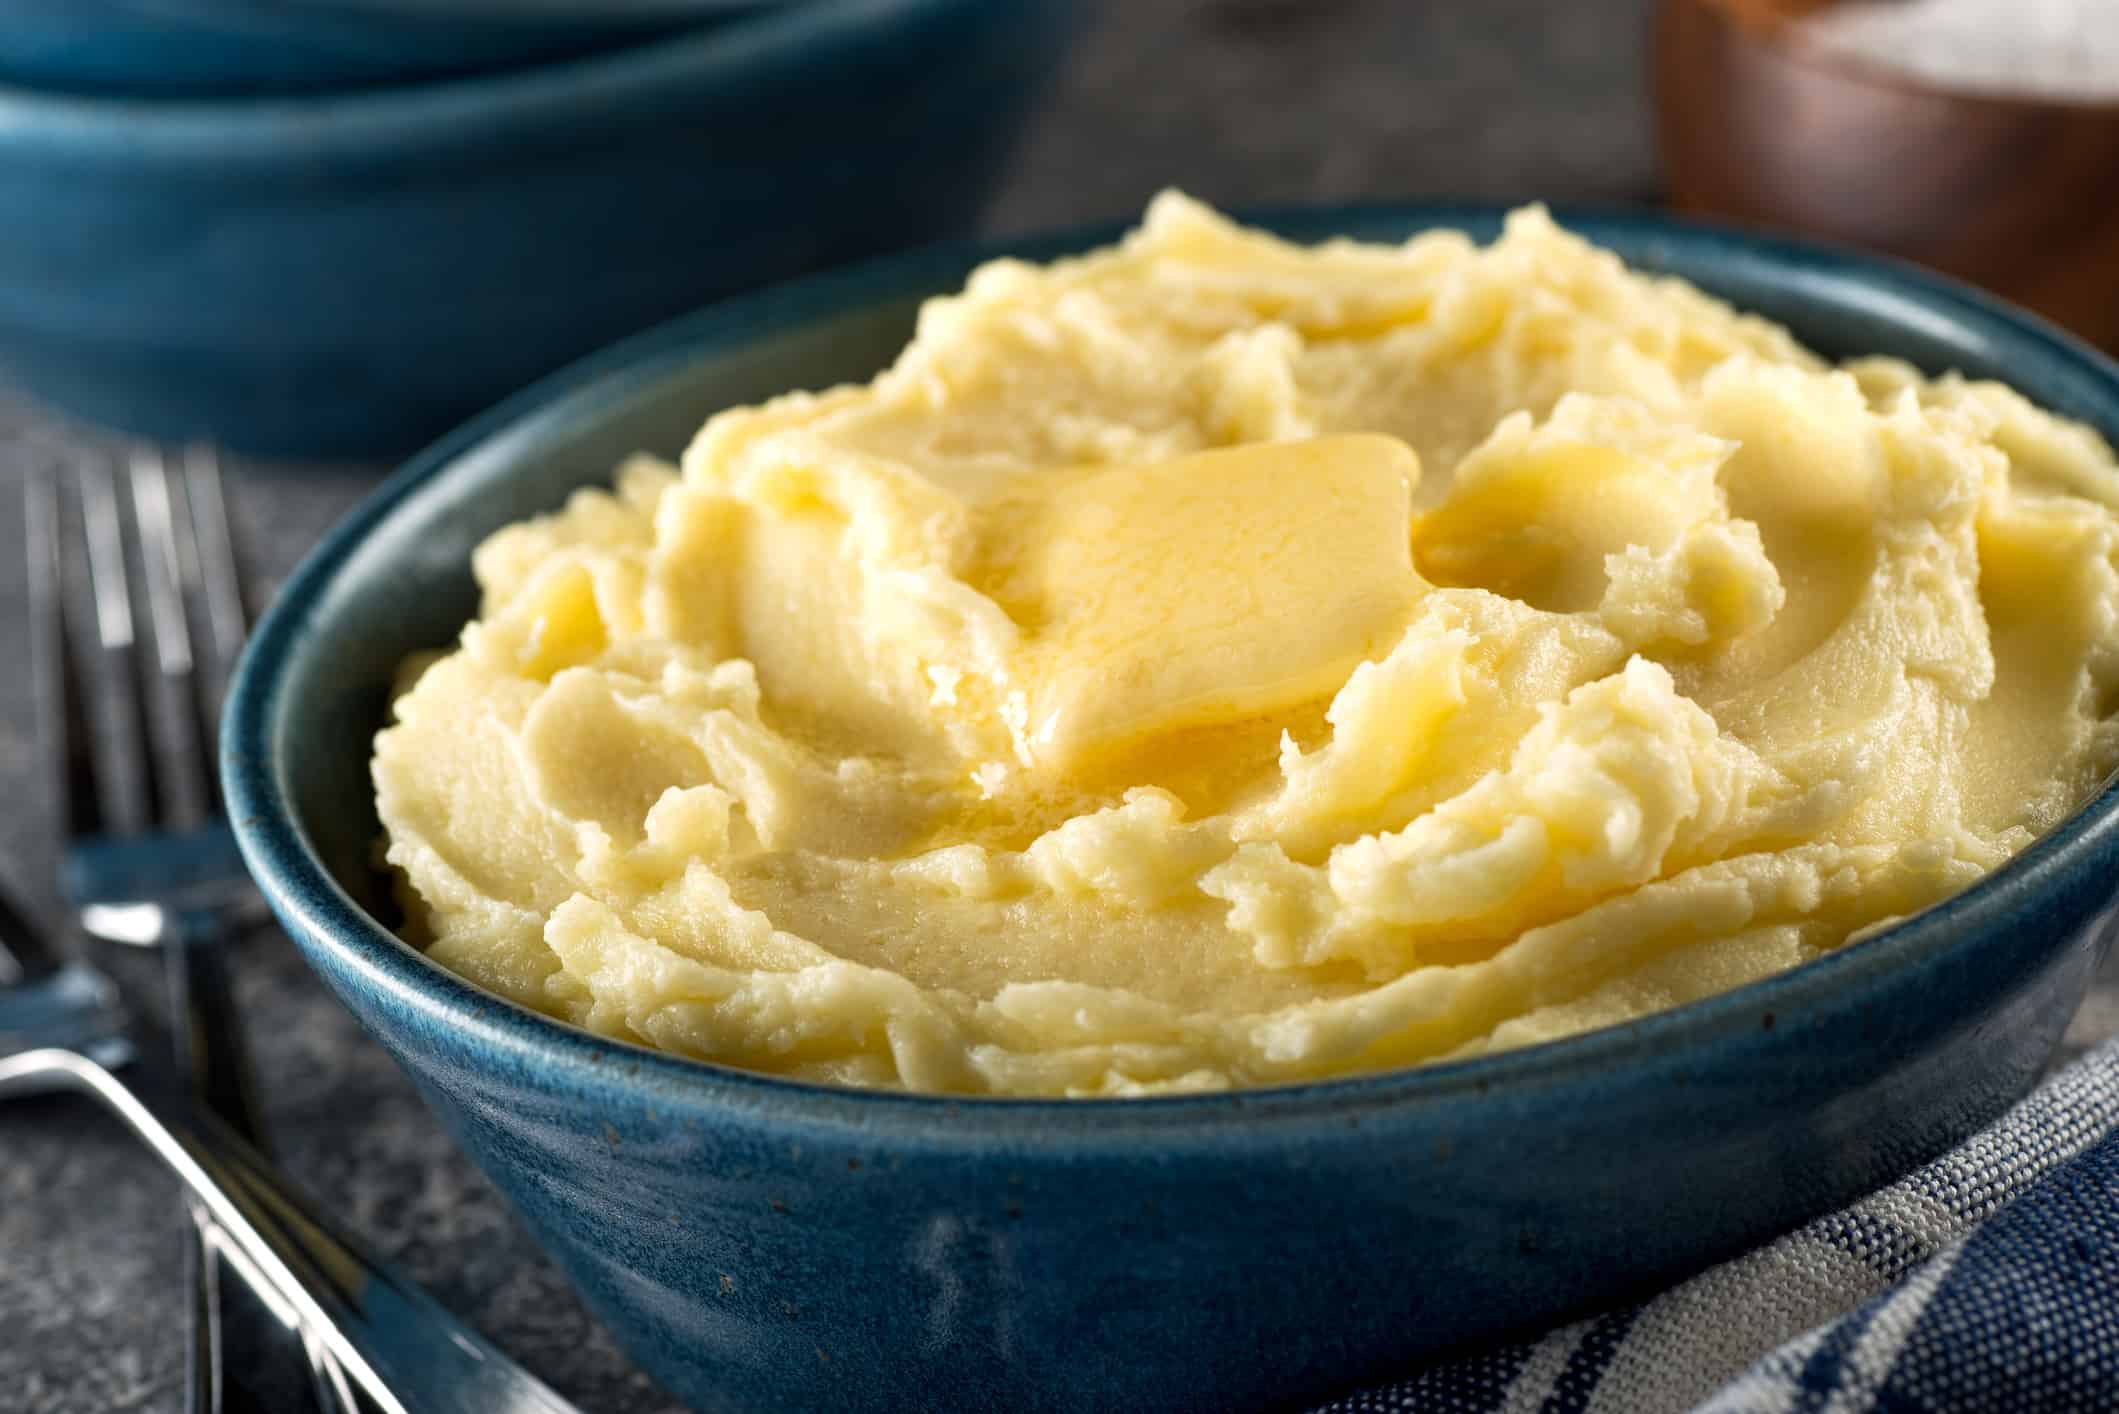 A bowl of delicious mashed potatoes with melted butter.